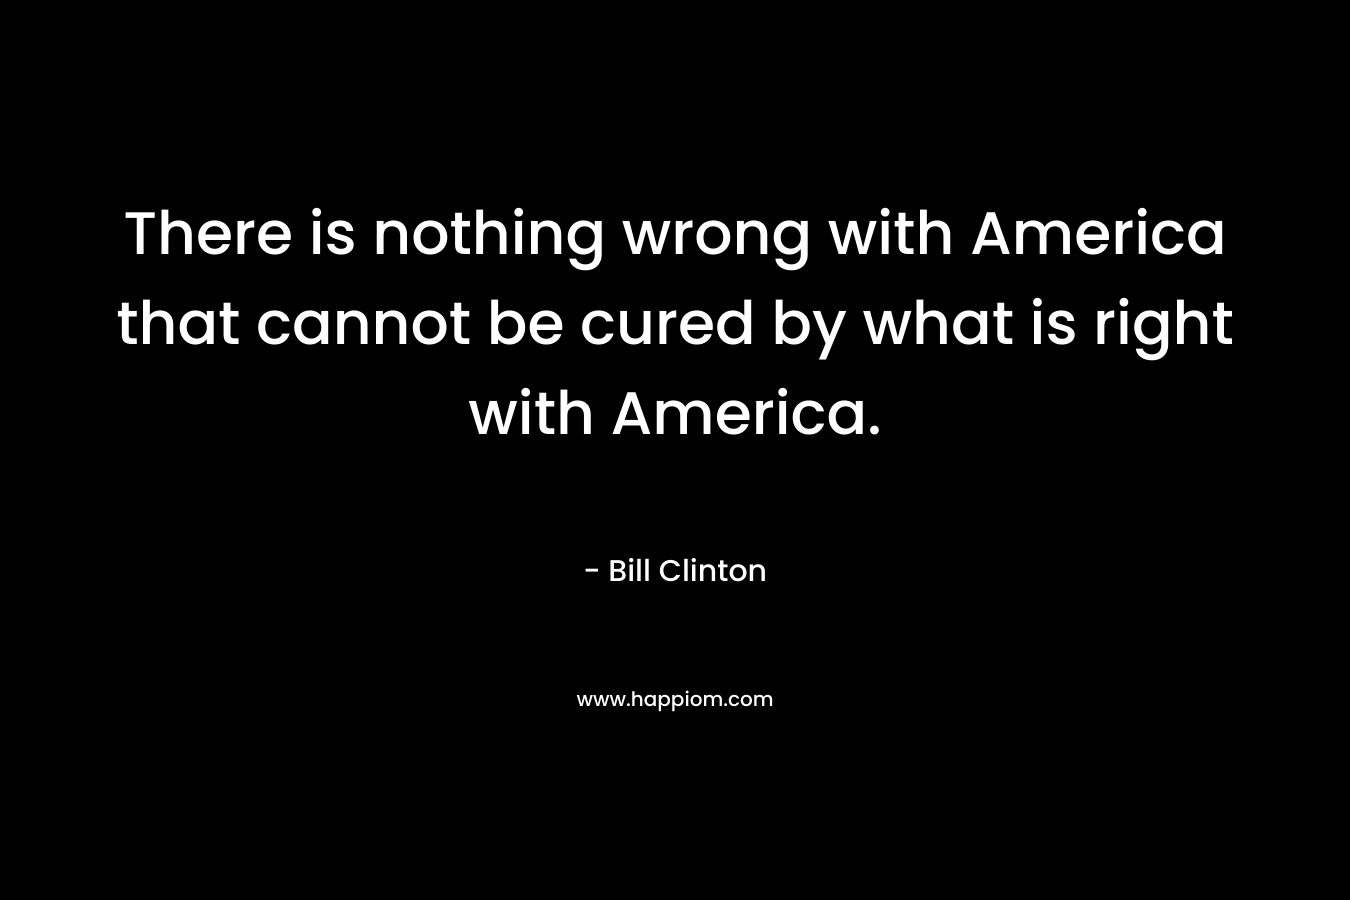 There is nothing wrong with America that cannot be cured by what is right with America.